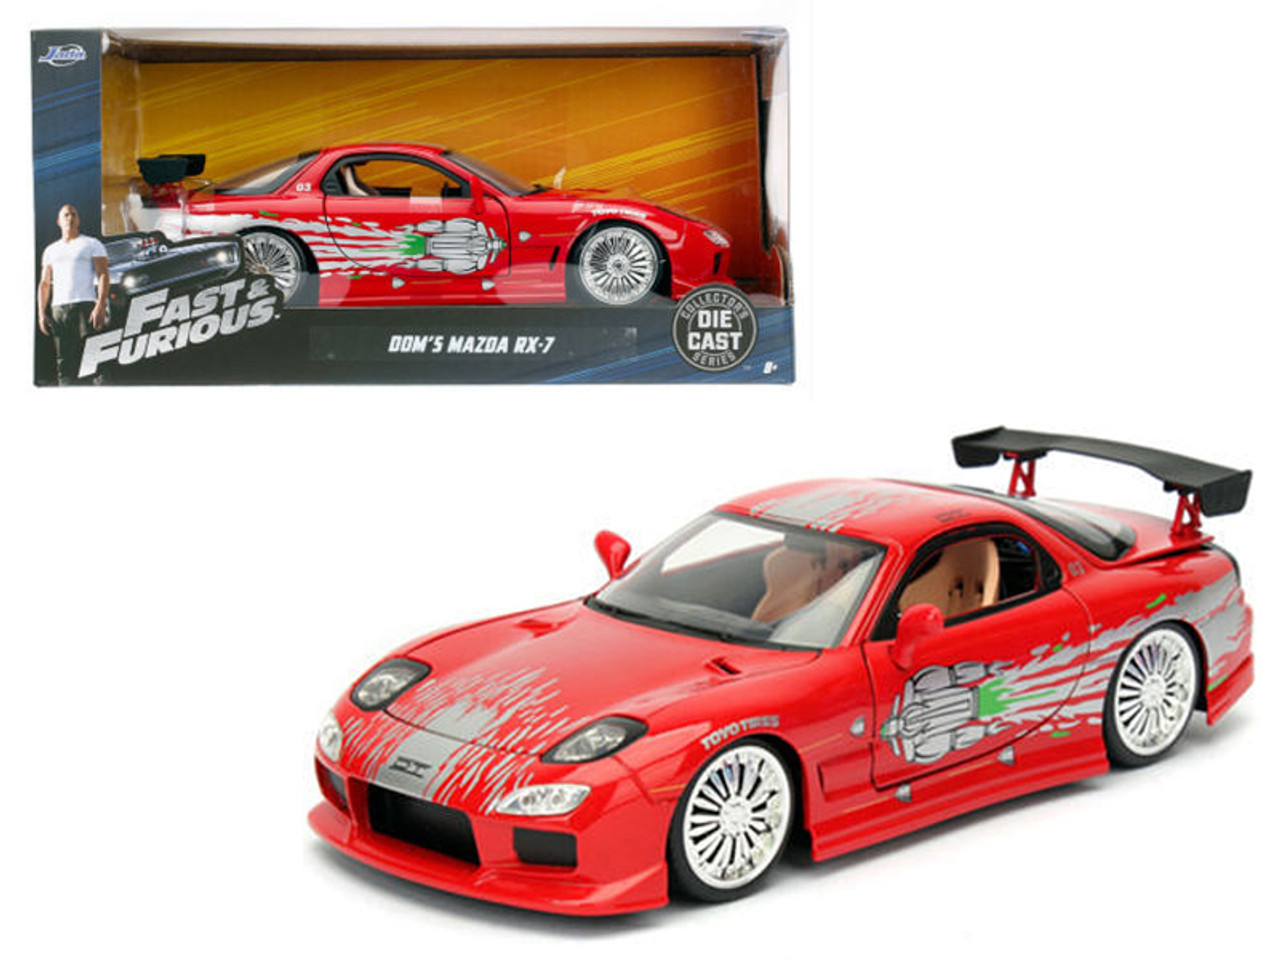 1/24 Jada Dom's Mazda RX-7 Red "Fast and Furious" Movie Diecast Model